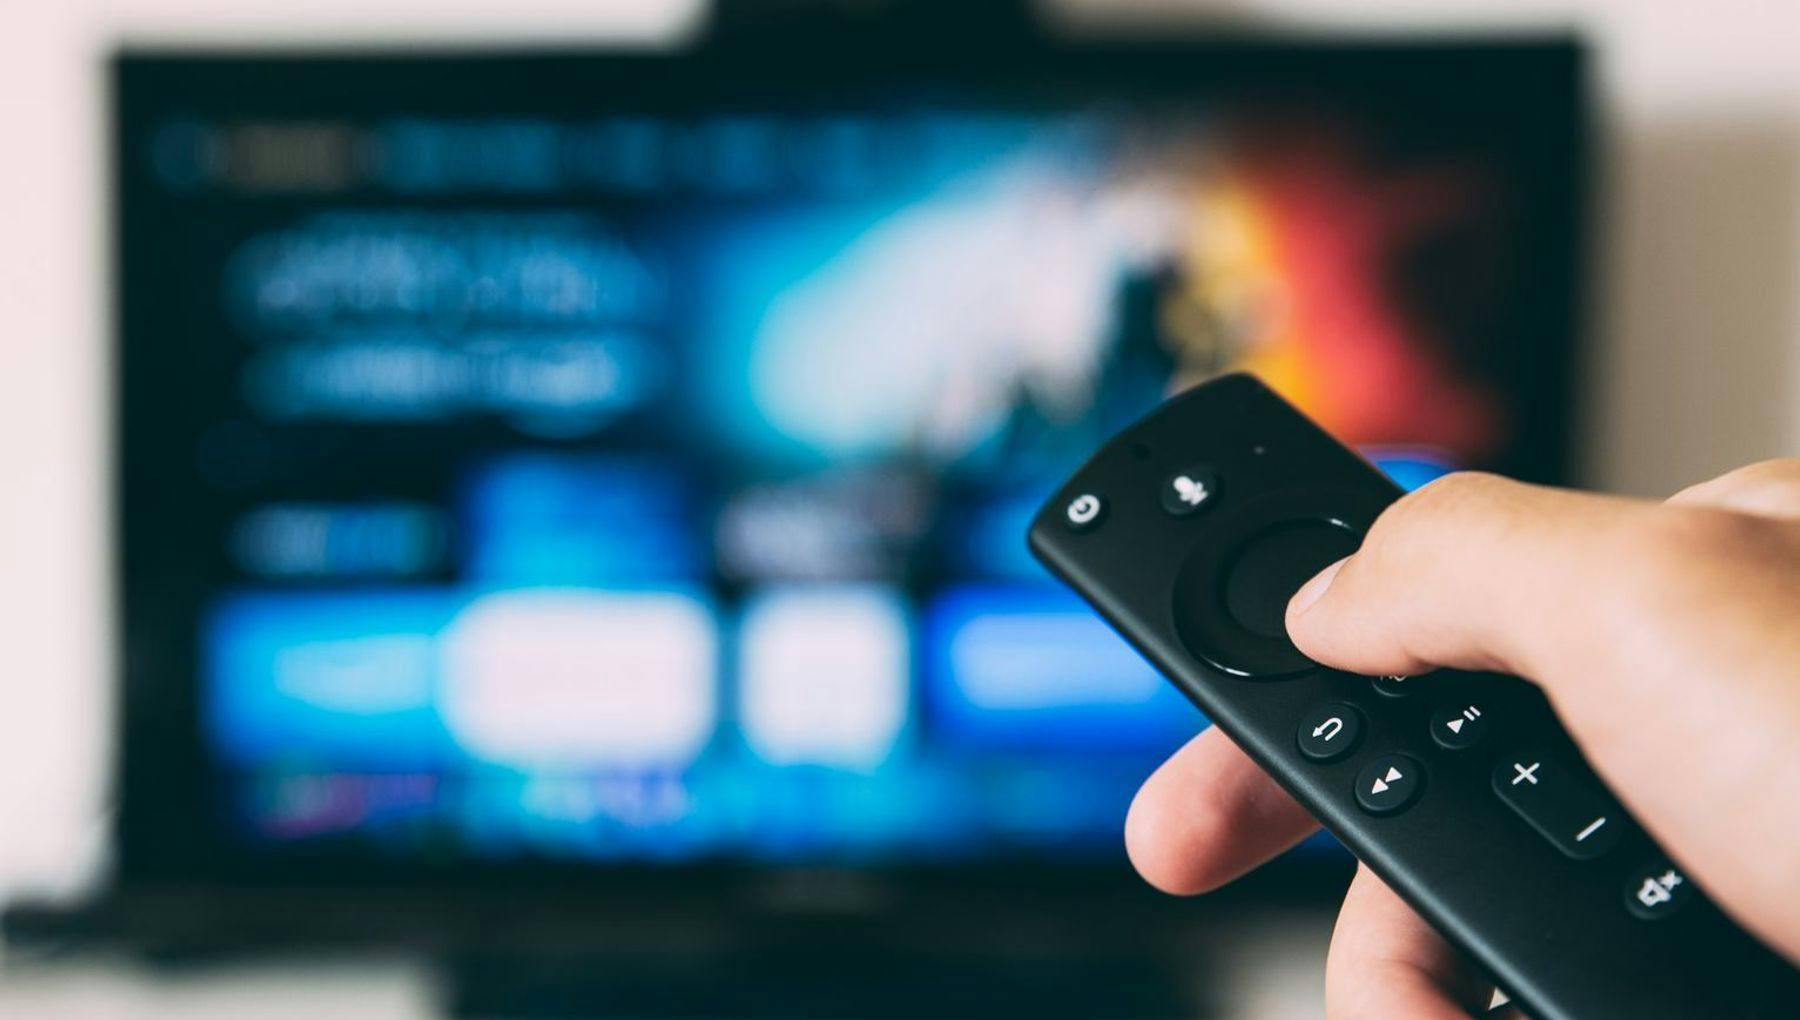 Hand with remote pointing at tv, Unsplash stockphoto